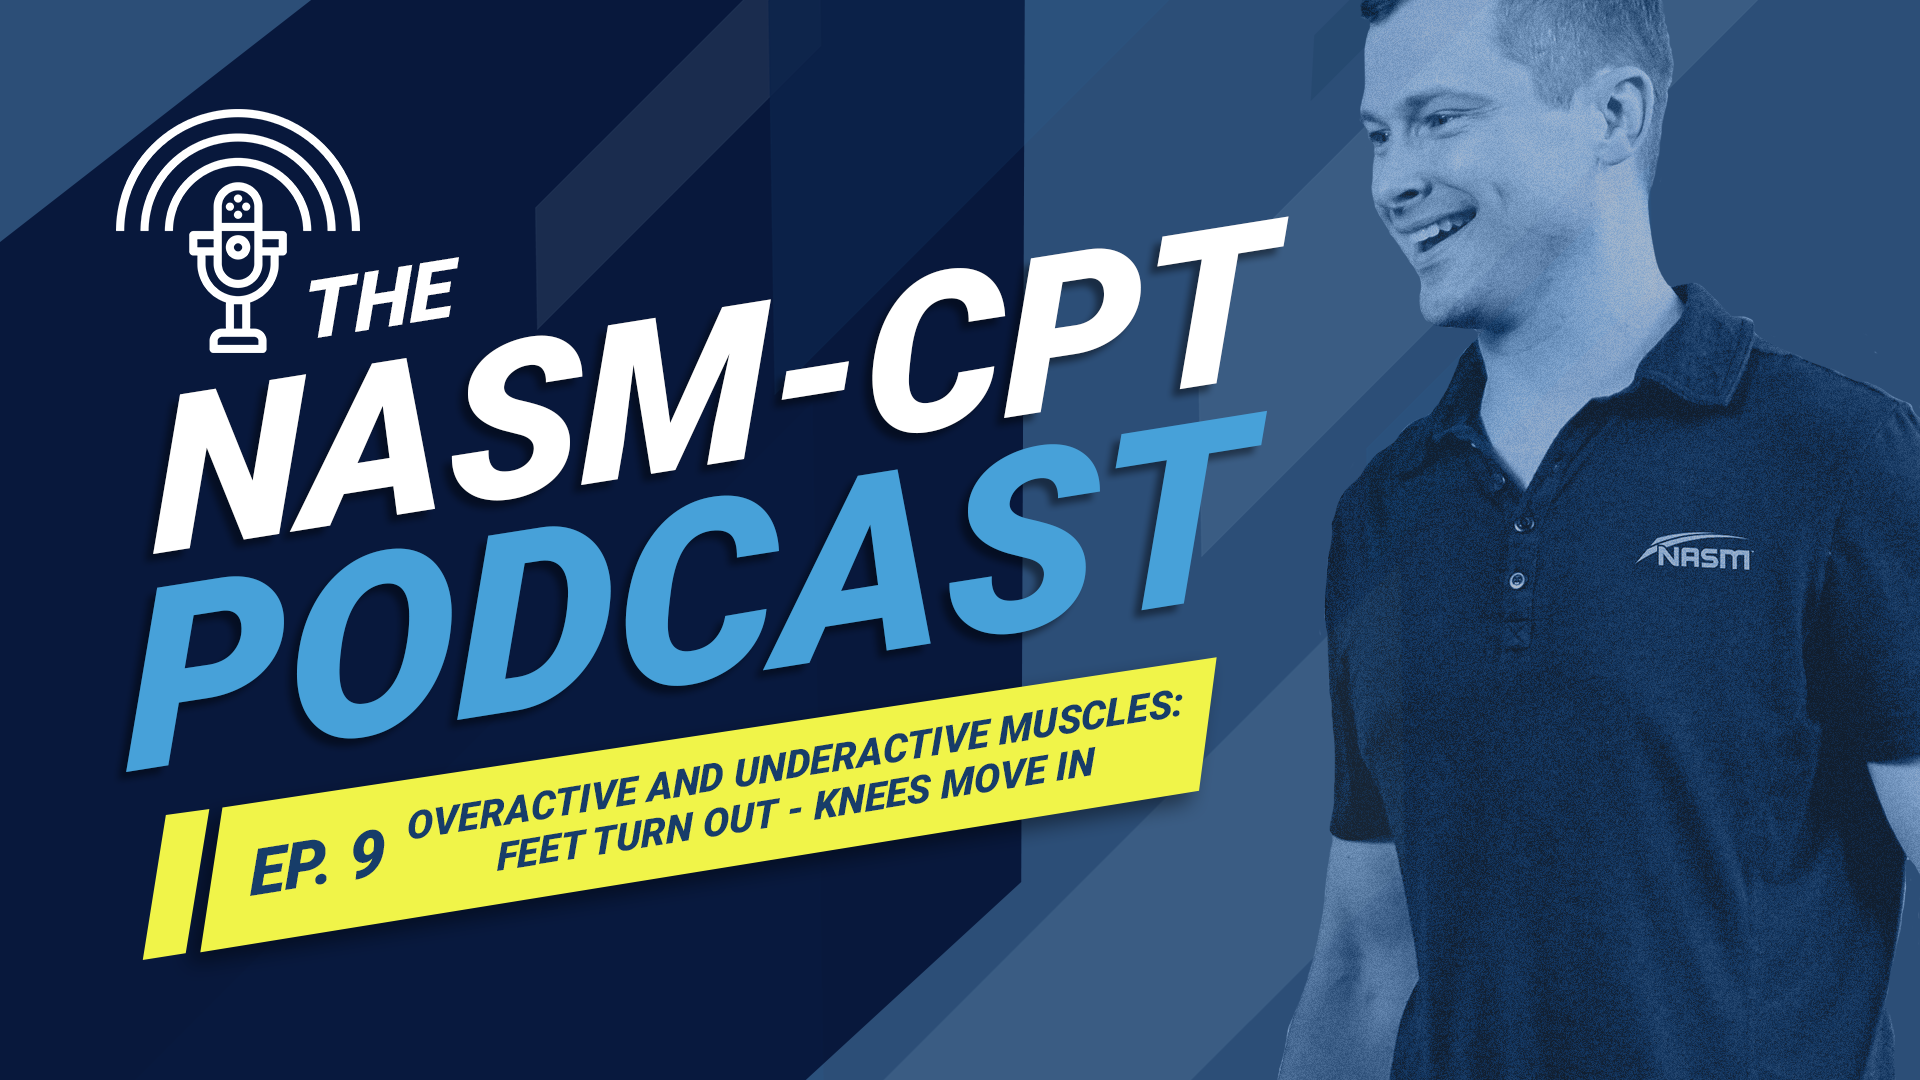 The NASM-CPT Podcast Ep. 9 Overactive and Underactive Muscles: Feet Turn Out - Knees Move In